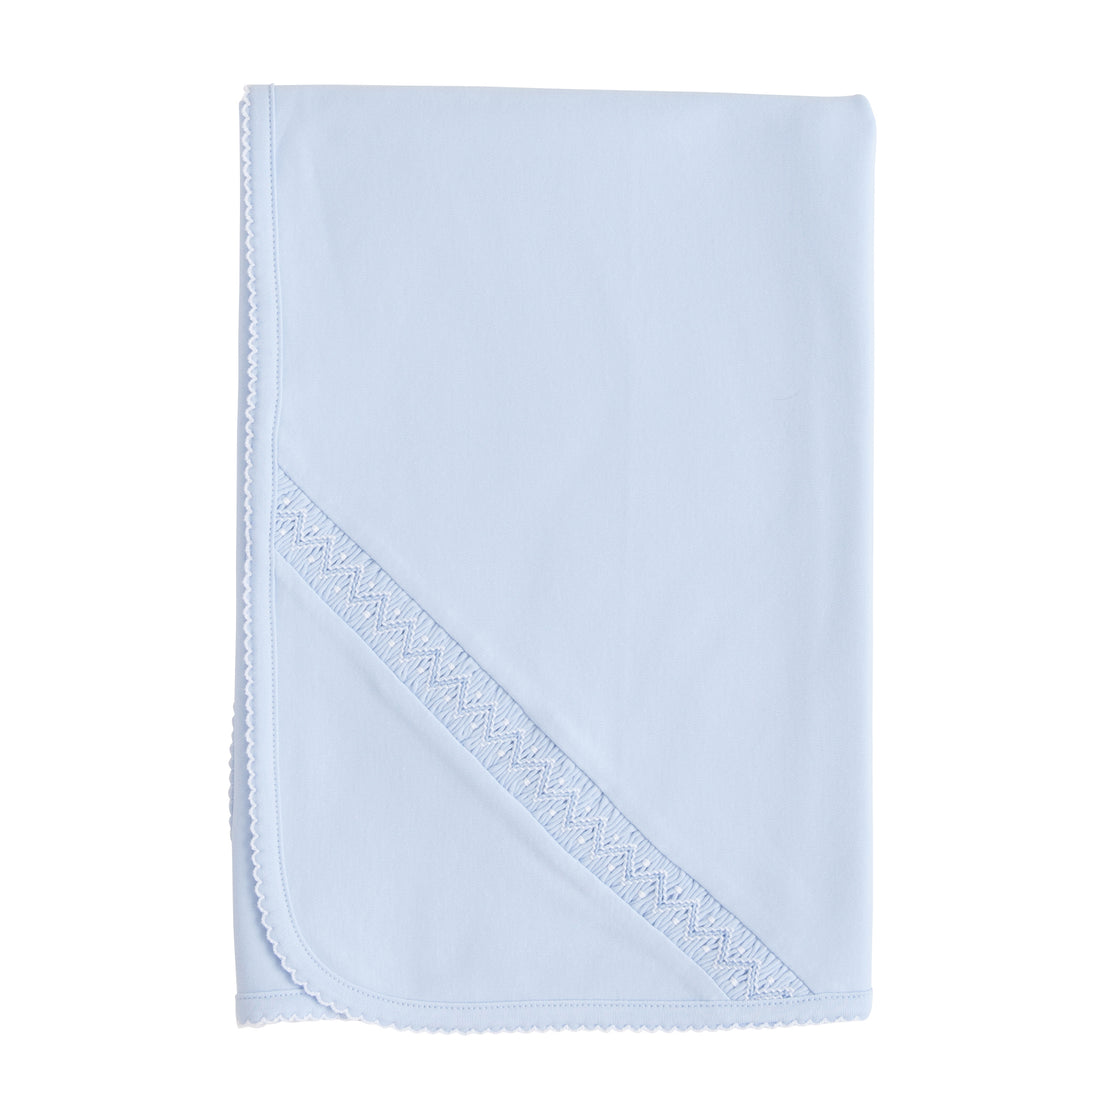 Little English classic receiving blanket for newborns, blue cotton blanket with smocking